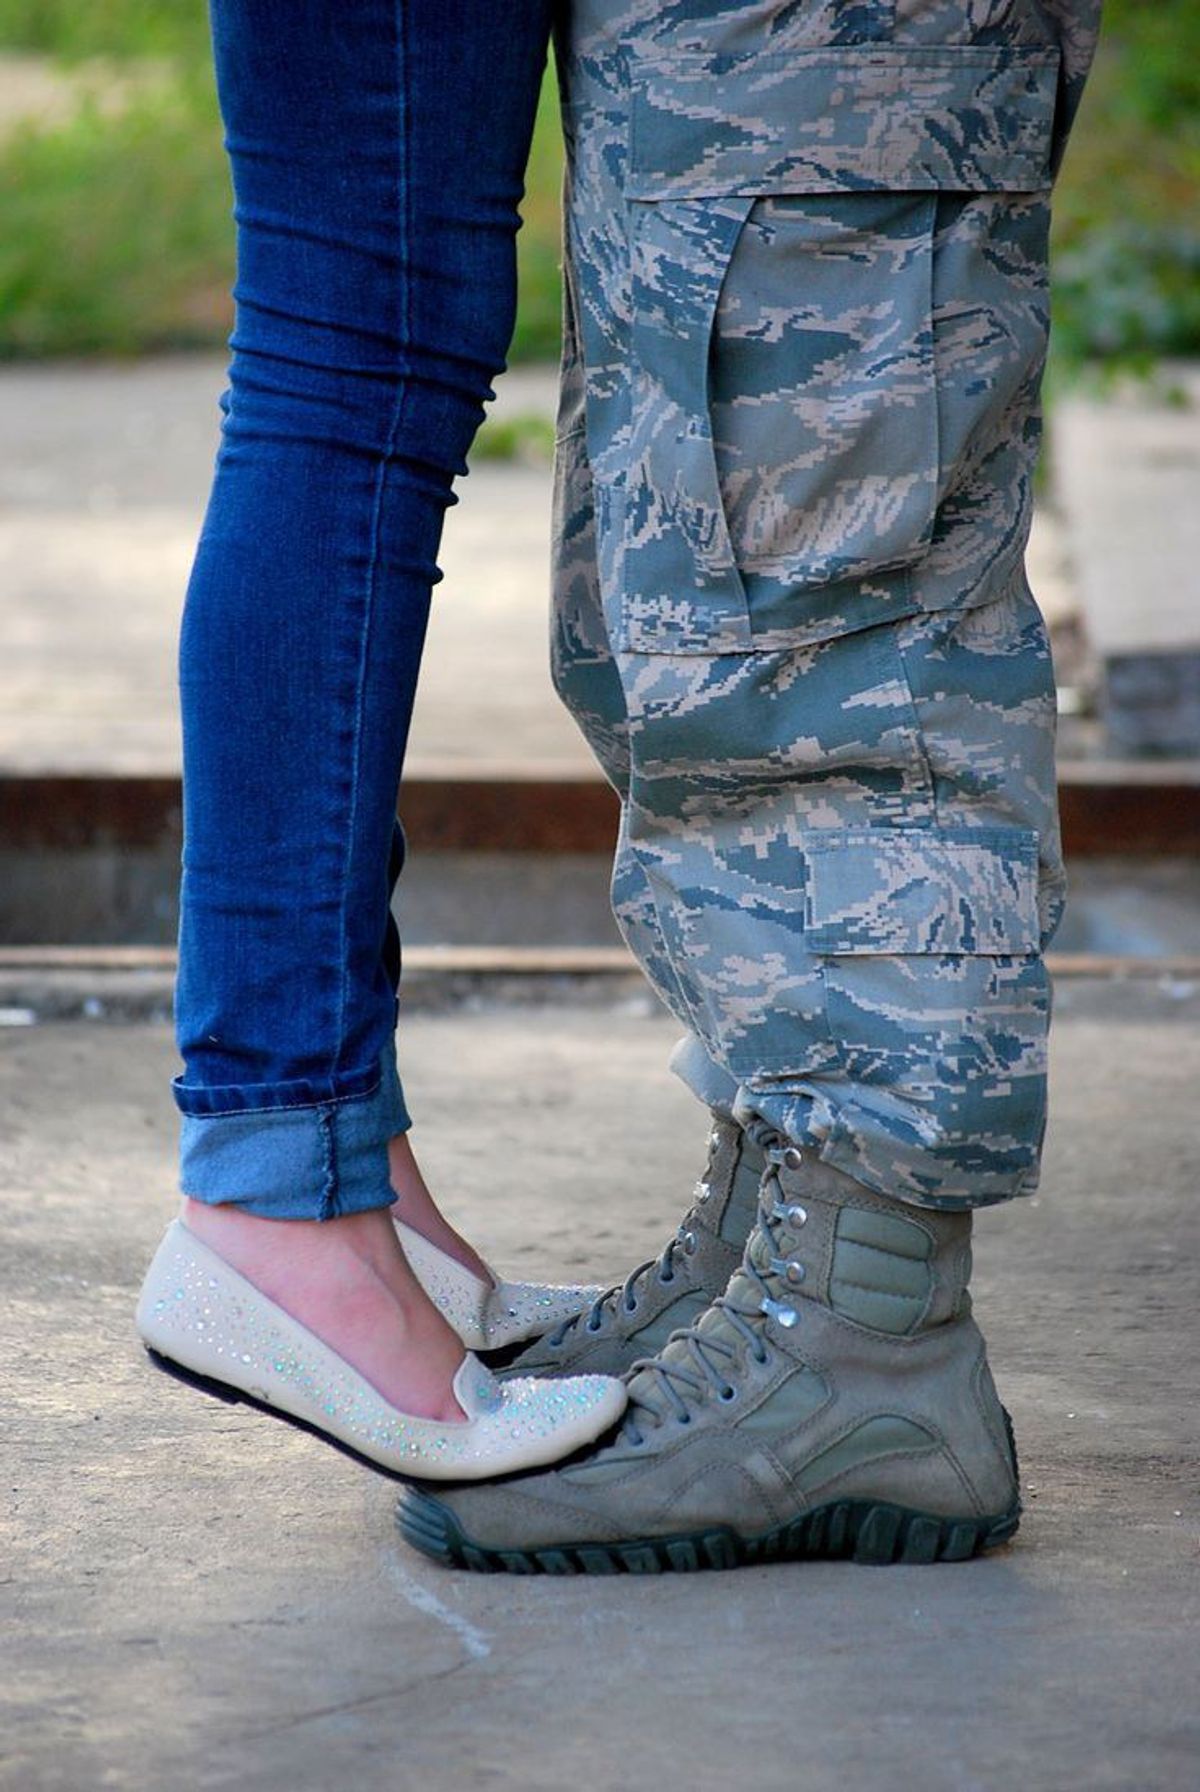 5 Truths Behind Military Relationships